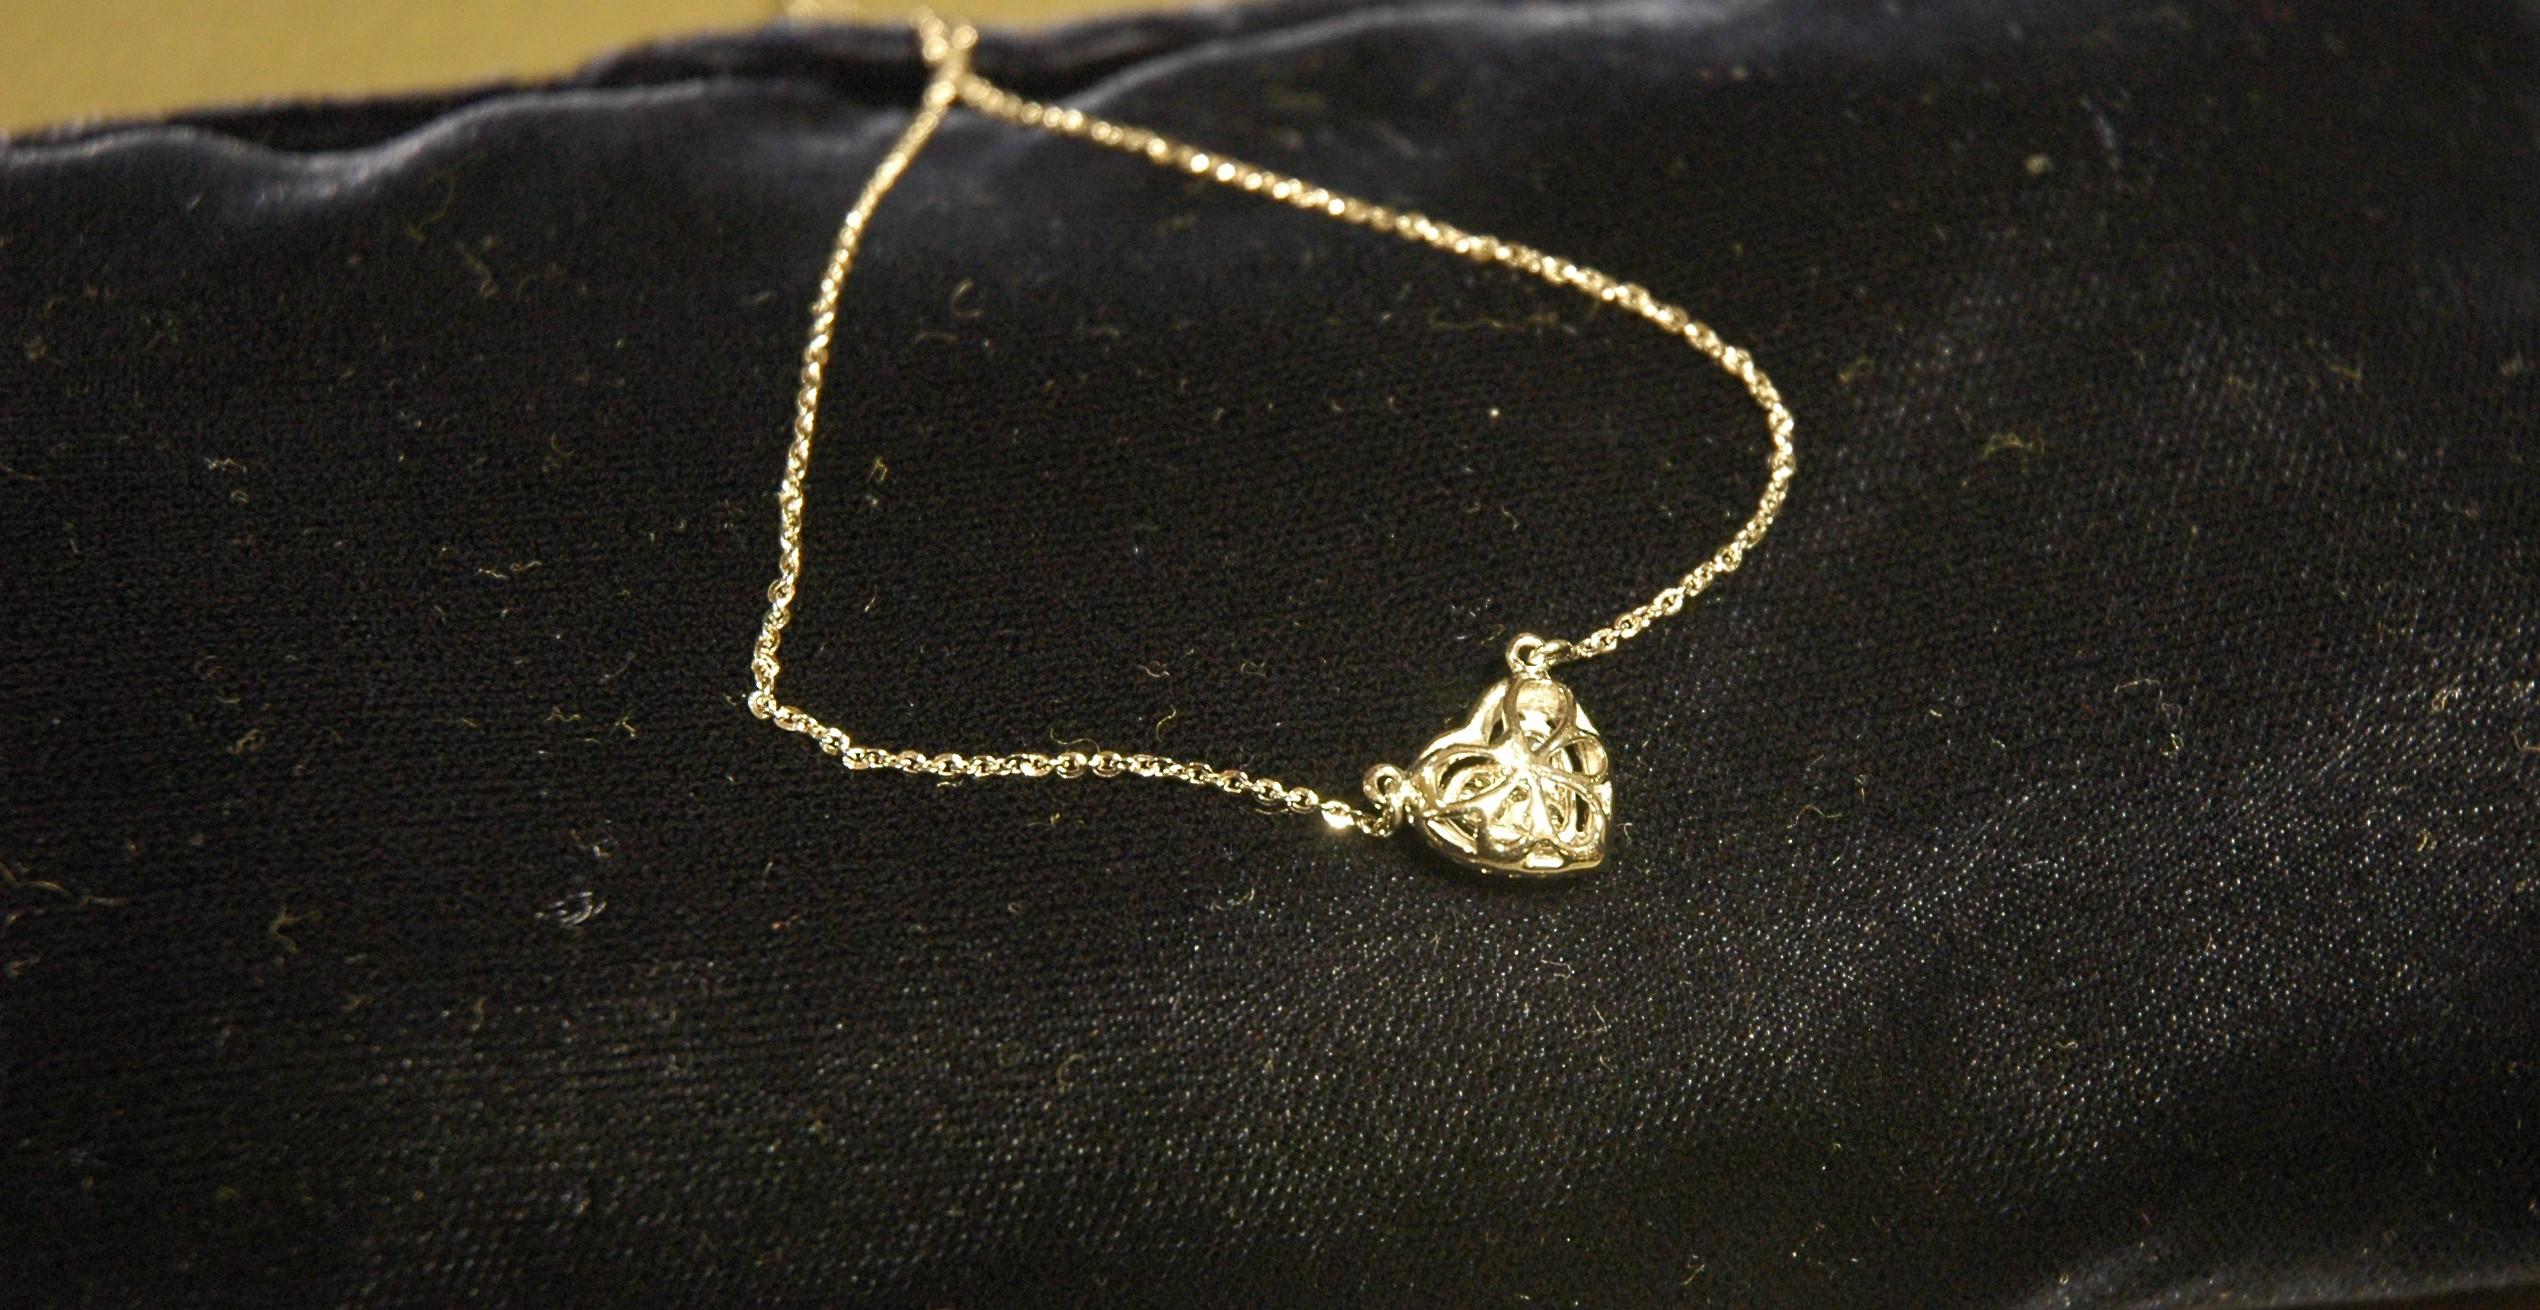 18 k White gold necklace with a central heart with diamonds (ct.0.65). The chain is of the diamond type. The heart has three larger central stones and an outline of small diamonds.